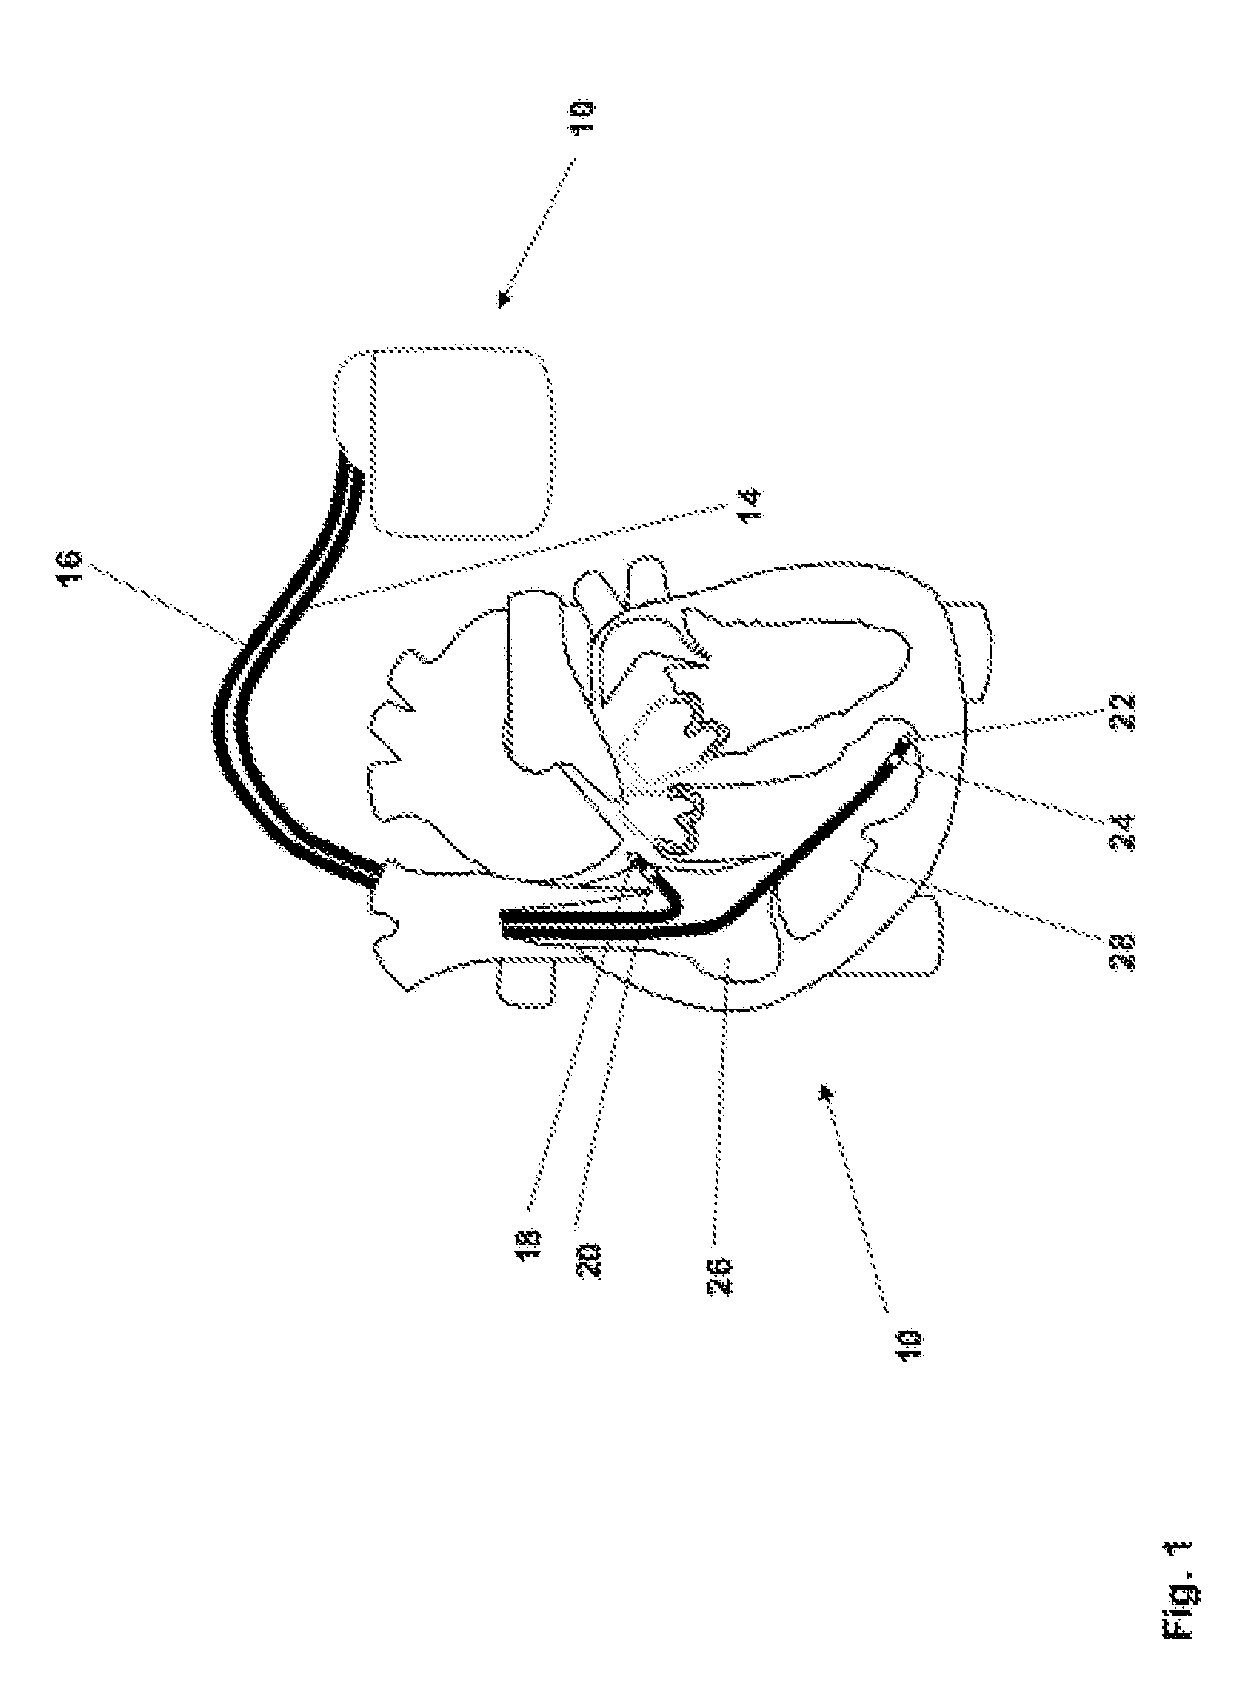 Implantable medical device comprising magnetic field detector